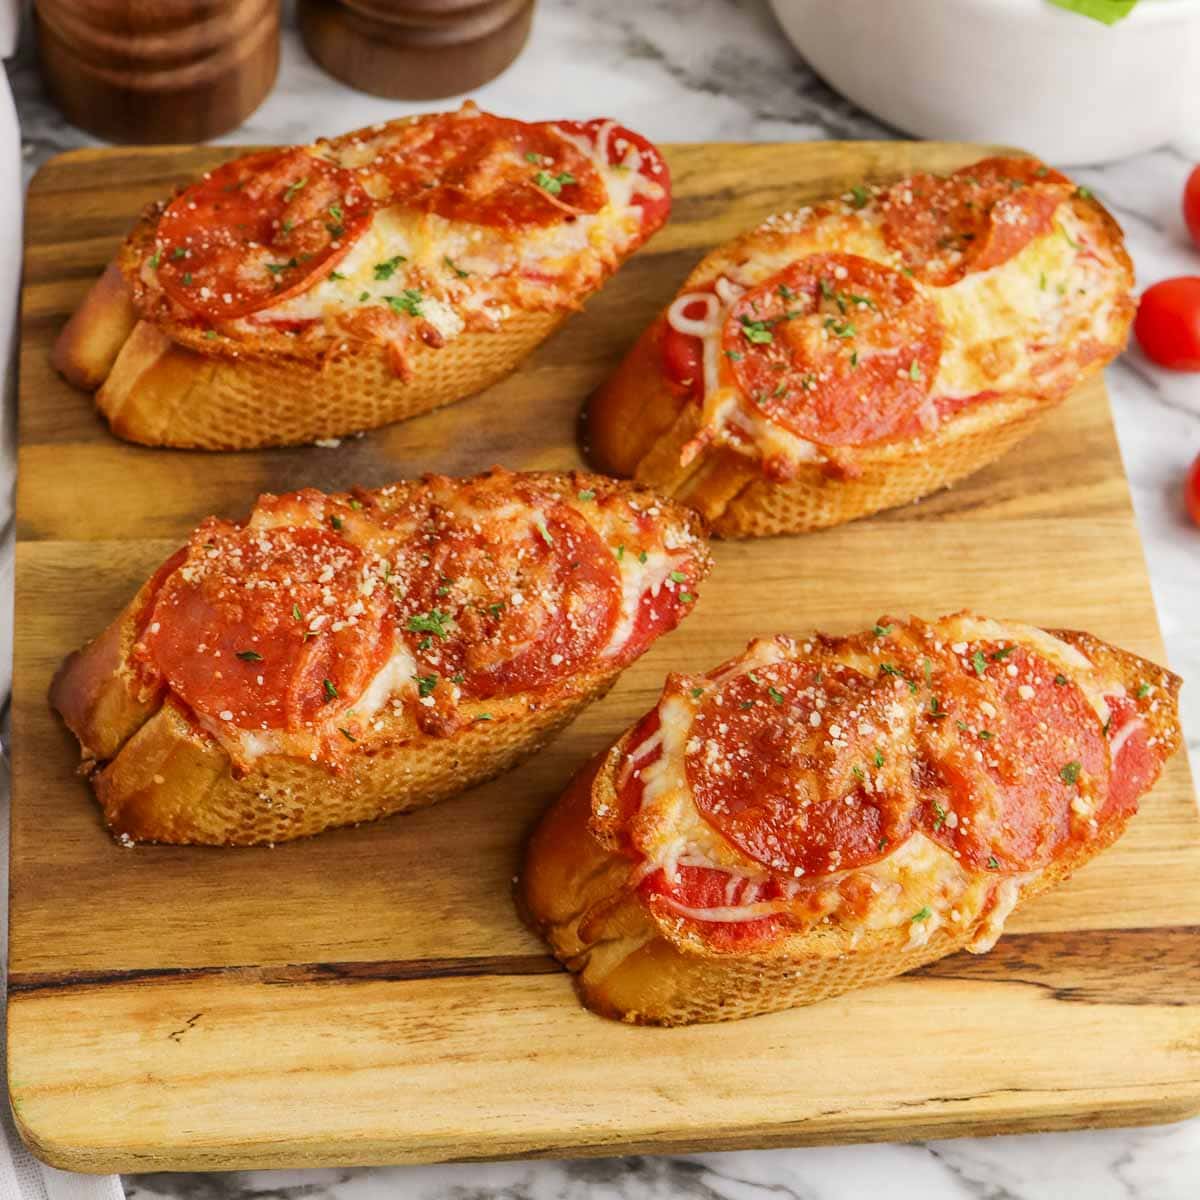 Four pepperoni pizza toasts on a wooden cutting board, garnished with herbs and served on a marble countertop.